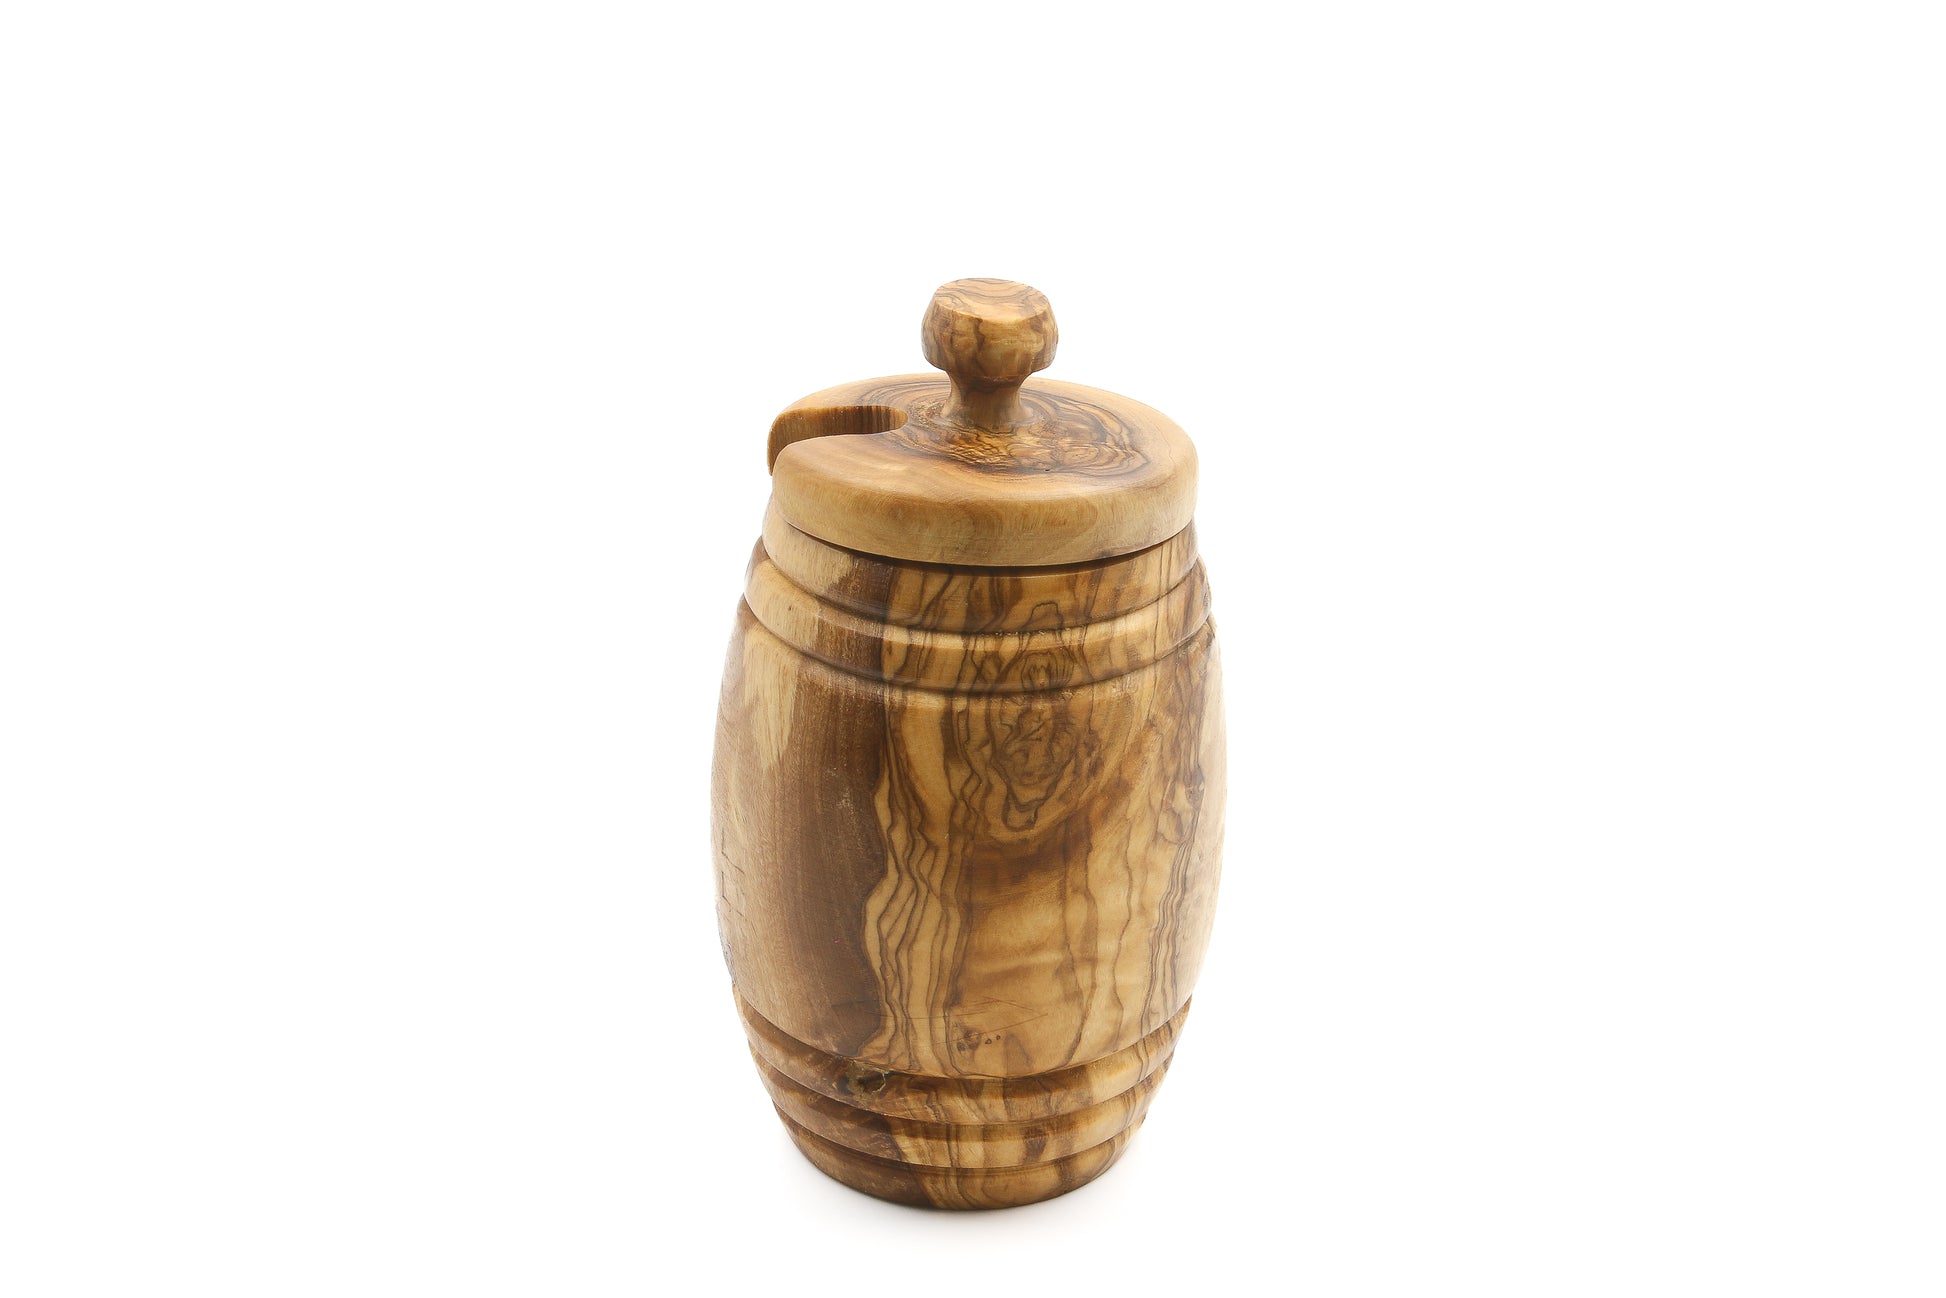 Eco-friendly honey storage jar made from olive wood, featuring a lid and drizzling tool